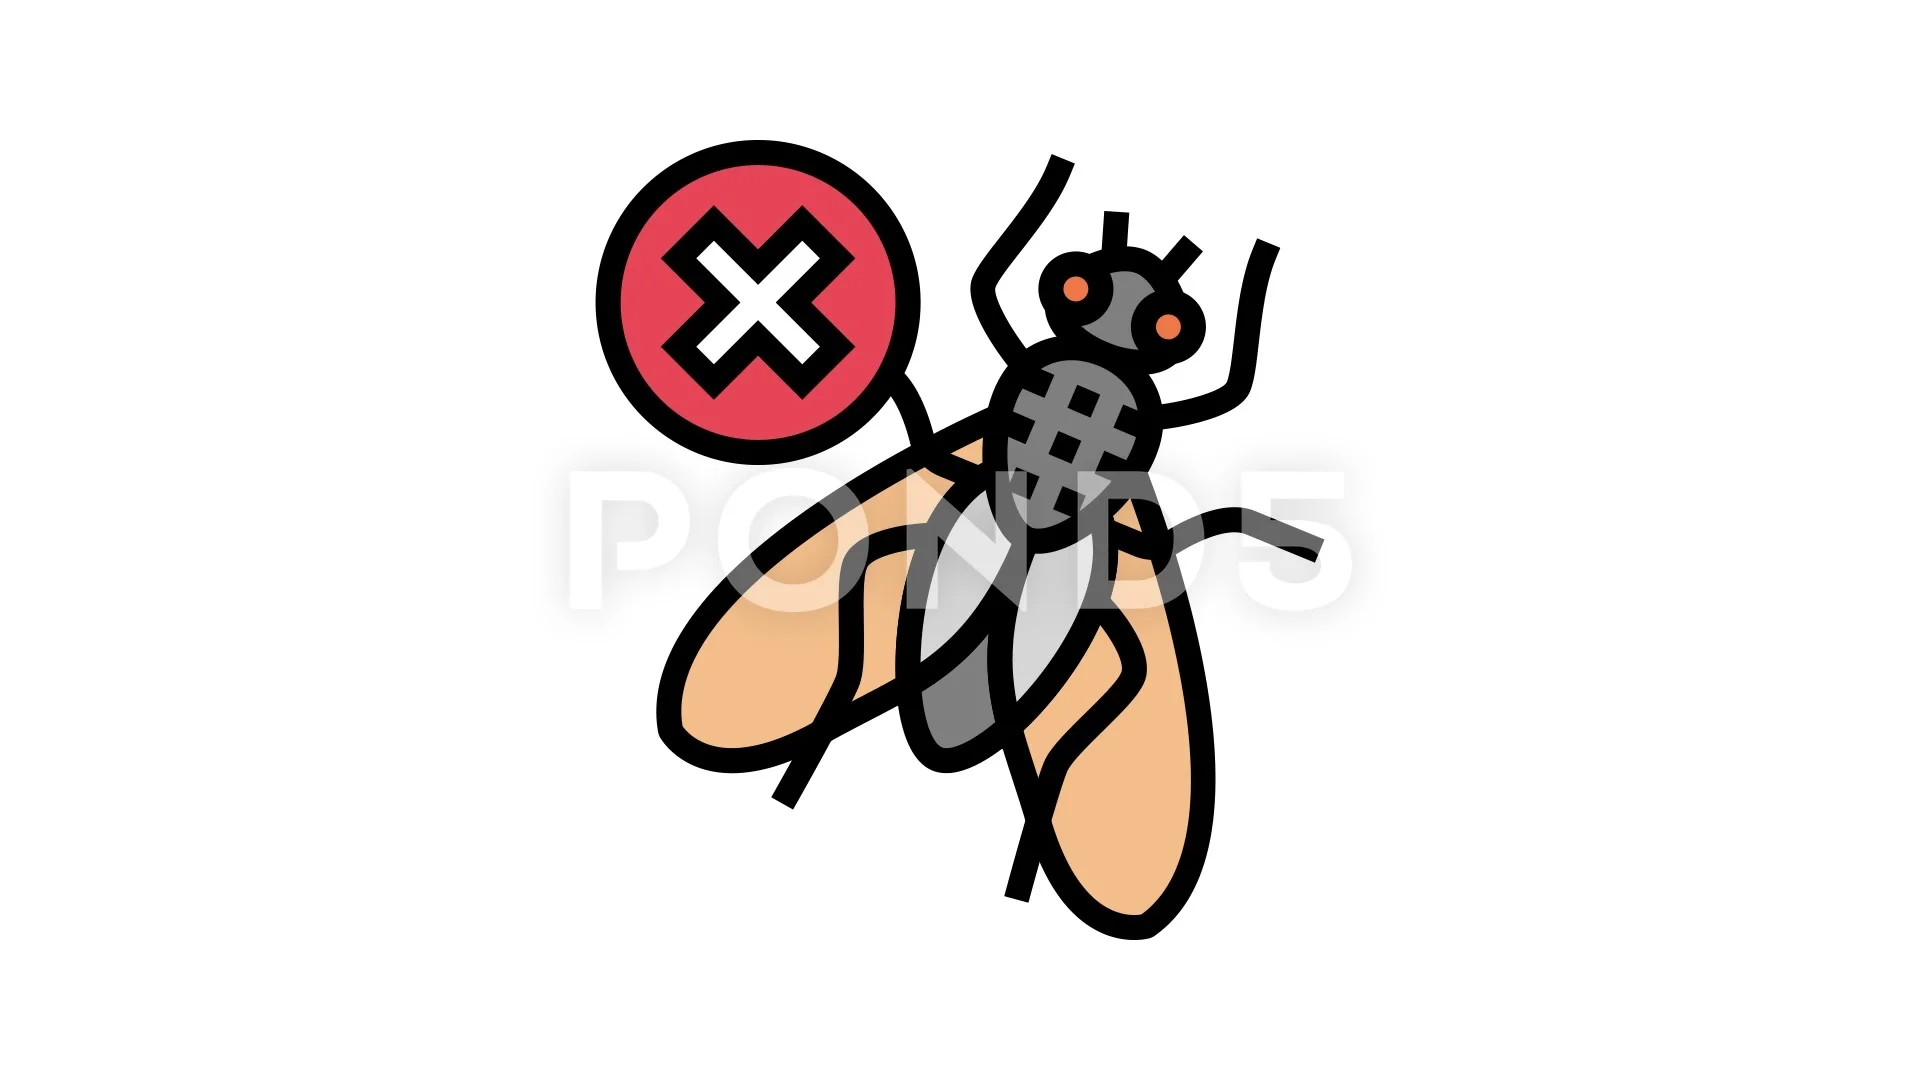 Pest Control Animation Stock Footage ~ Royalty Free Stock Videos | Pond5